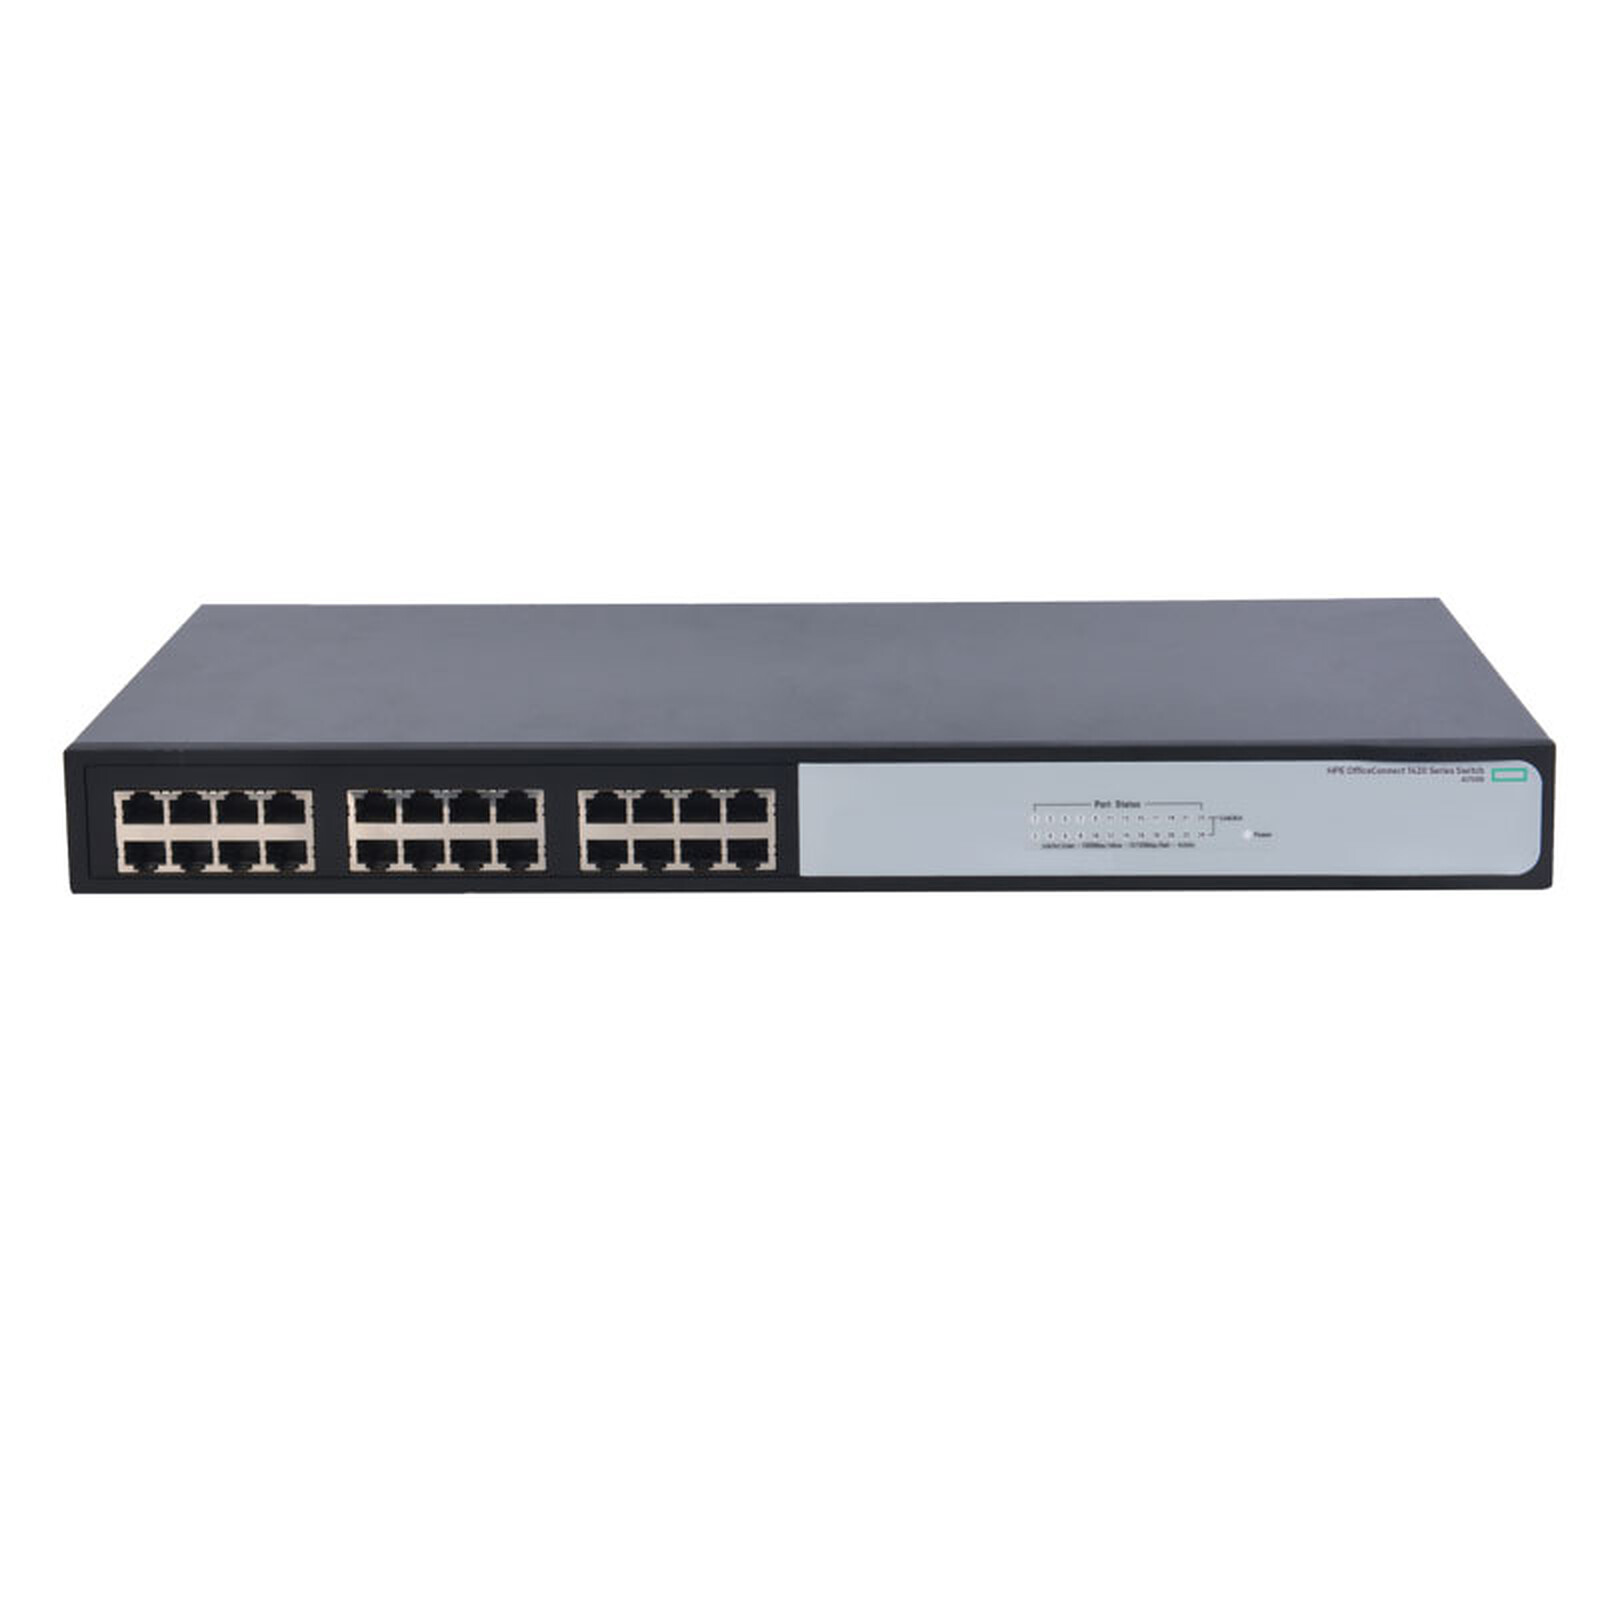 HPE OfficeConnect 1420 24G (JG708B) - Achat Switch HPE pour ...